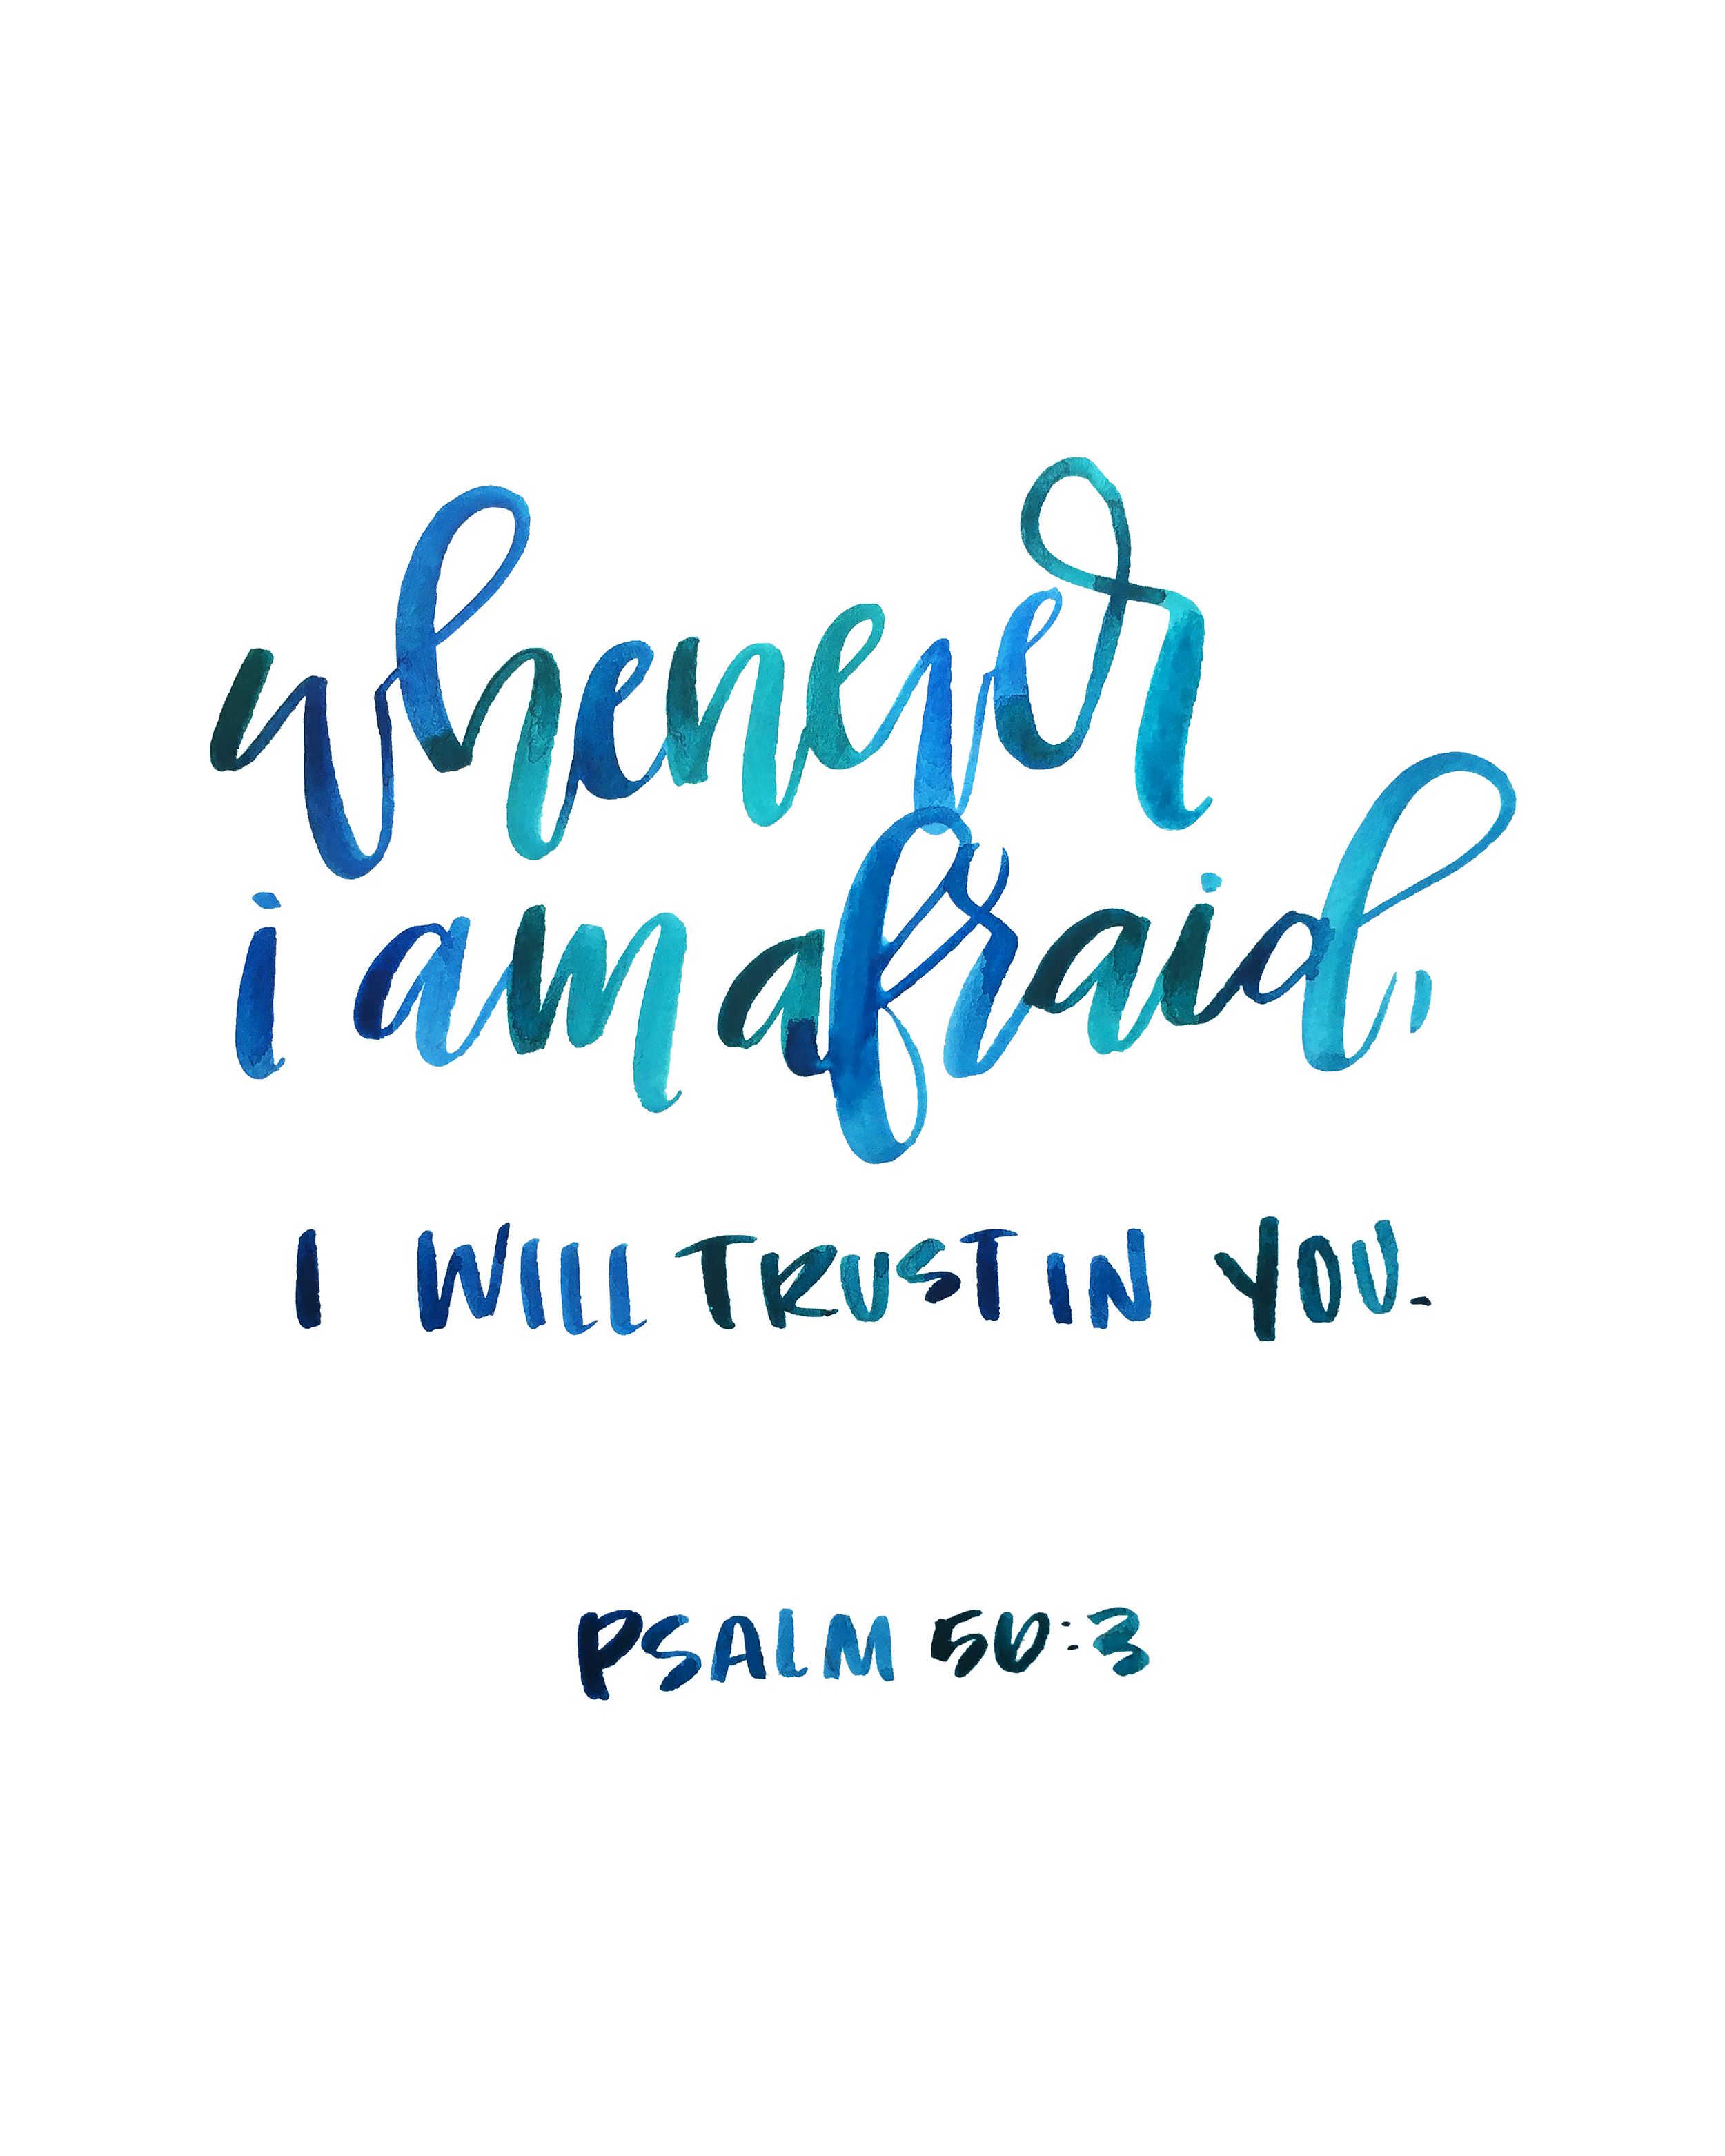 psalm 56:3. Psalms quotes, Bible quotes, Scripture quotes